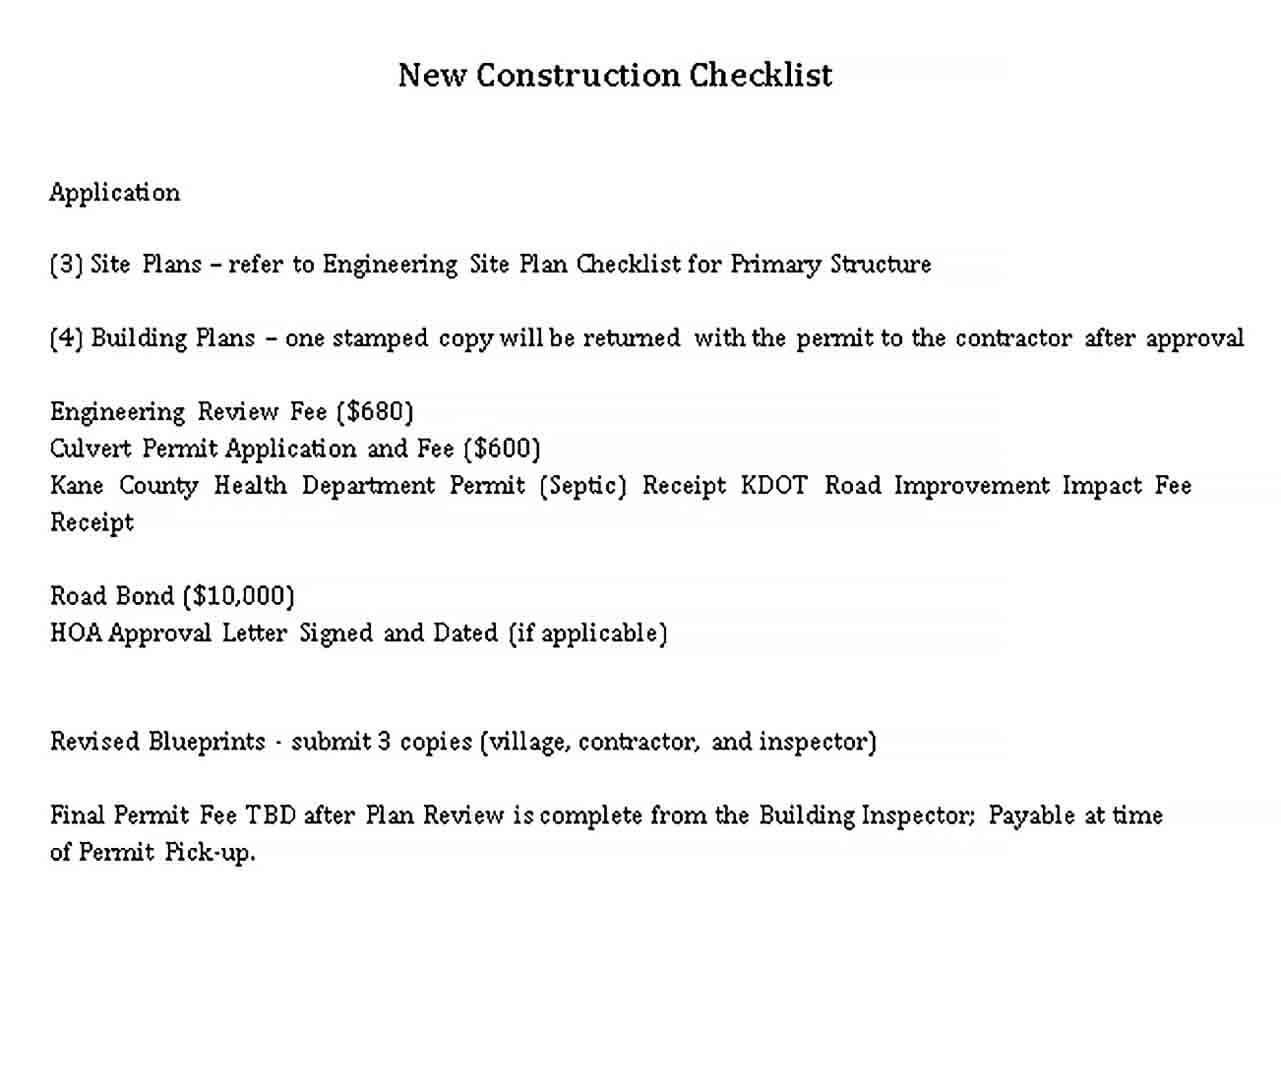 Sample New Construction Checklist Template